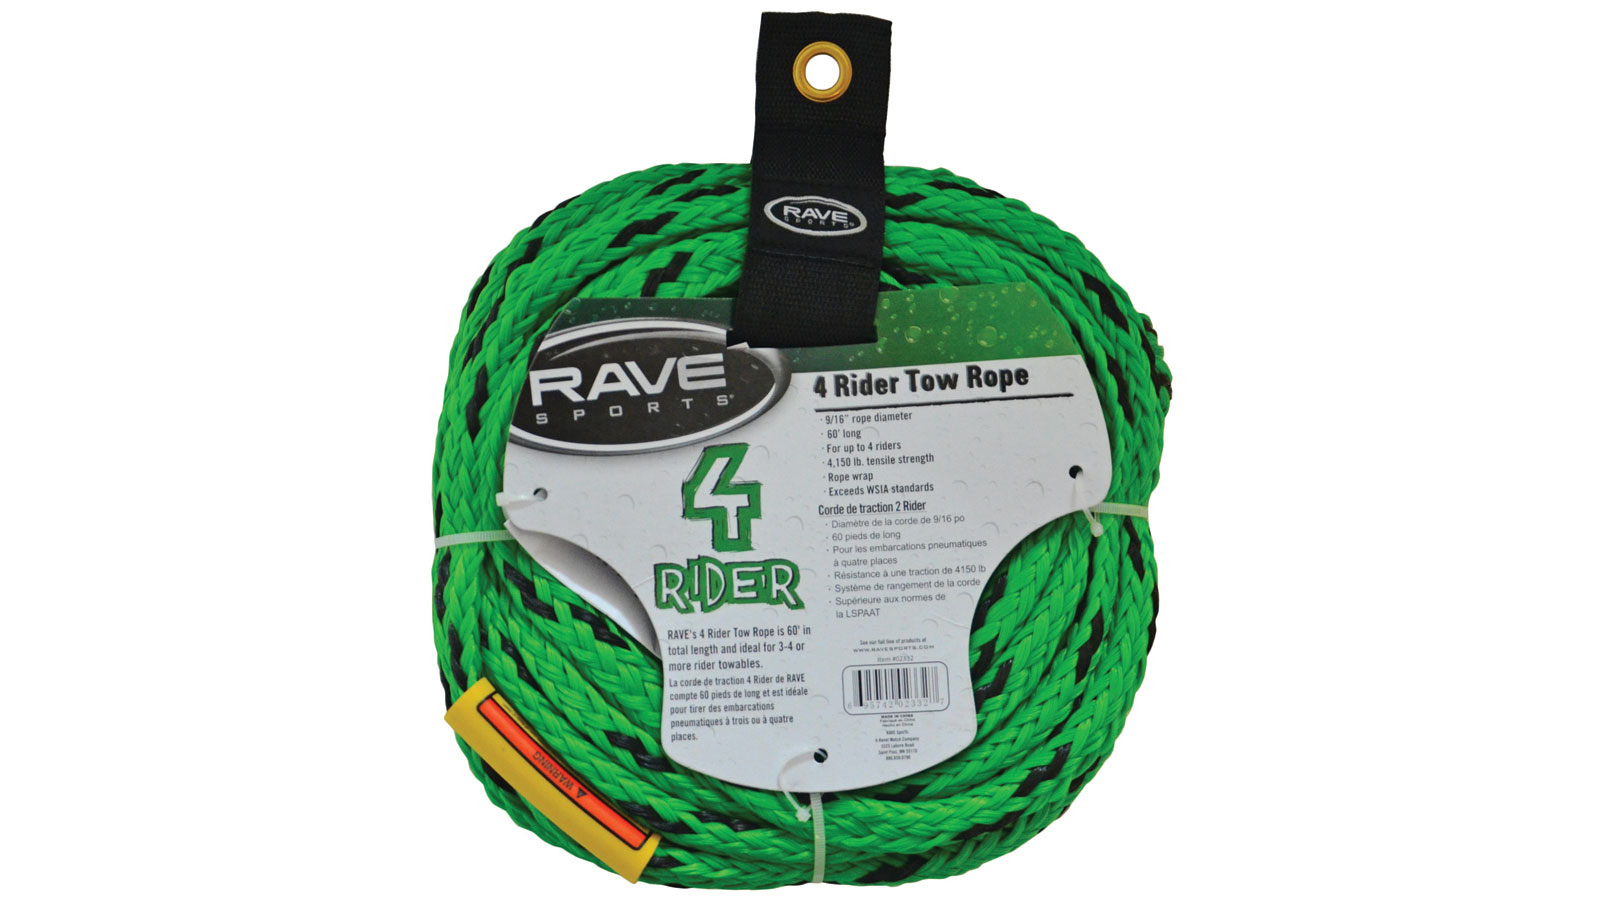 Rave Sports 02332 1-Section 4-Rider Tow Rope